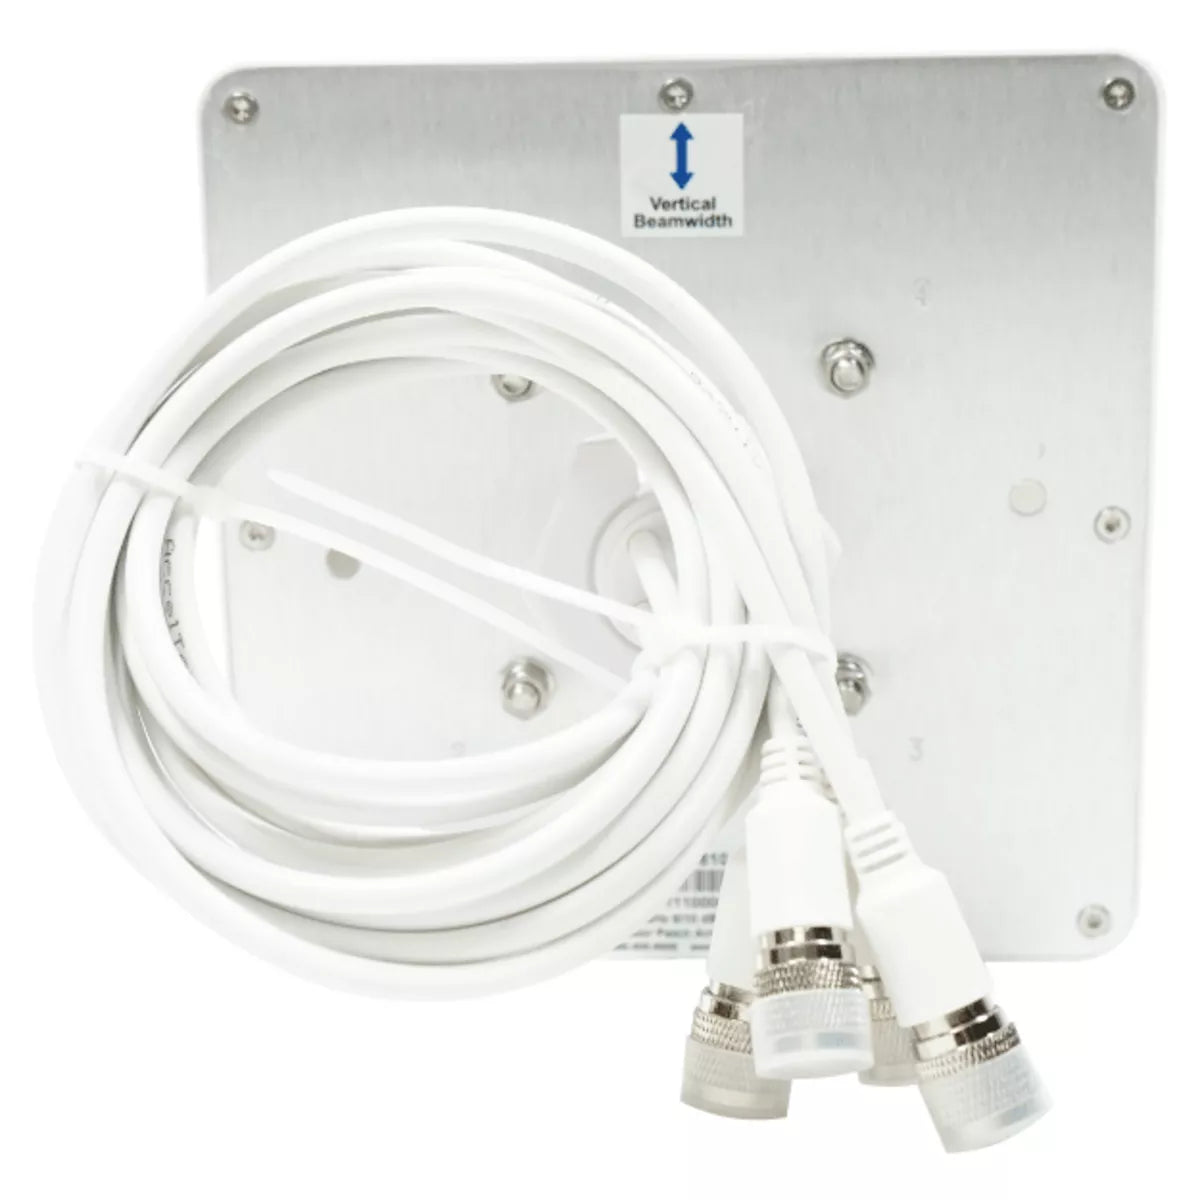 ATS-OP-245-810-Back-1_1200_075ad5dd-bfcf-4c08-89d3-1ae1ad8537ca Acceltex 2.4/5 GHz 8/10 dBi 4 Element Indoor/Outdoor Patch Antenna with RPSMA V2 Wi-Fi Antennas acceltex acceltex antennas acceltex patch antenna acceltex solutions patch antenne